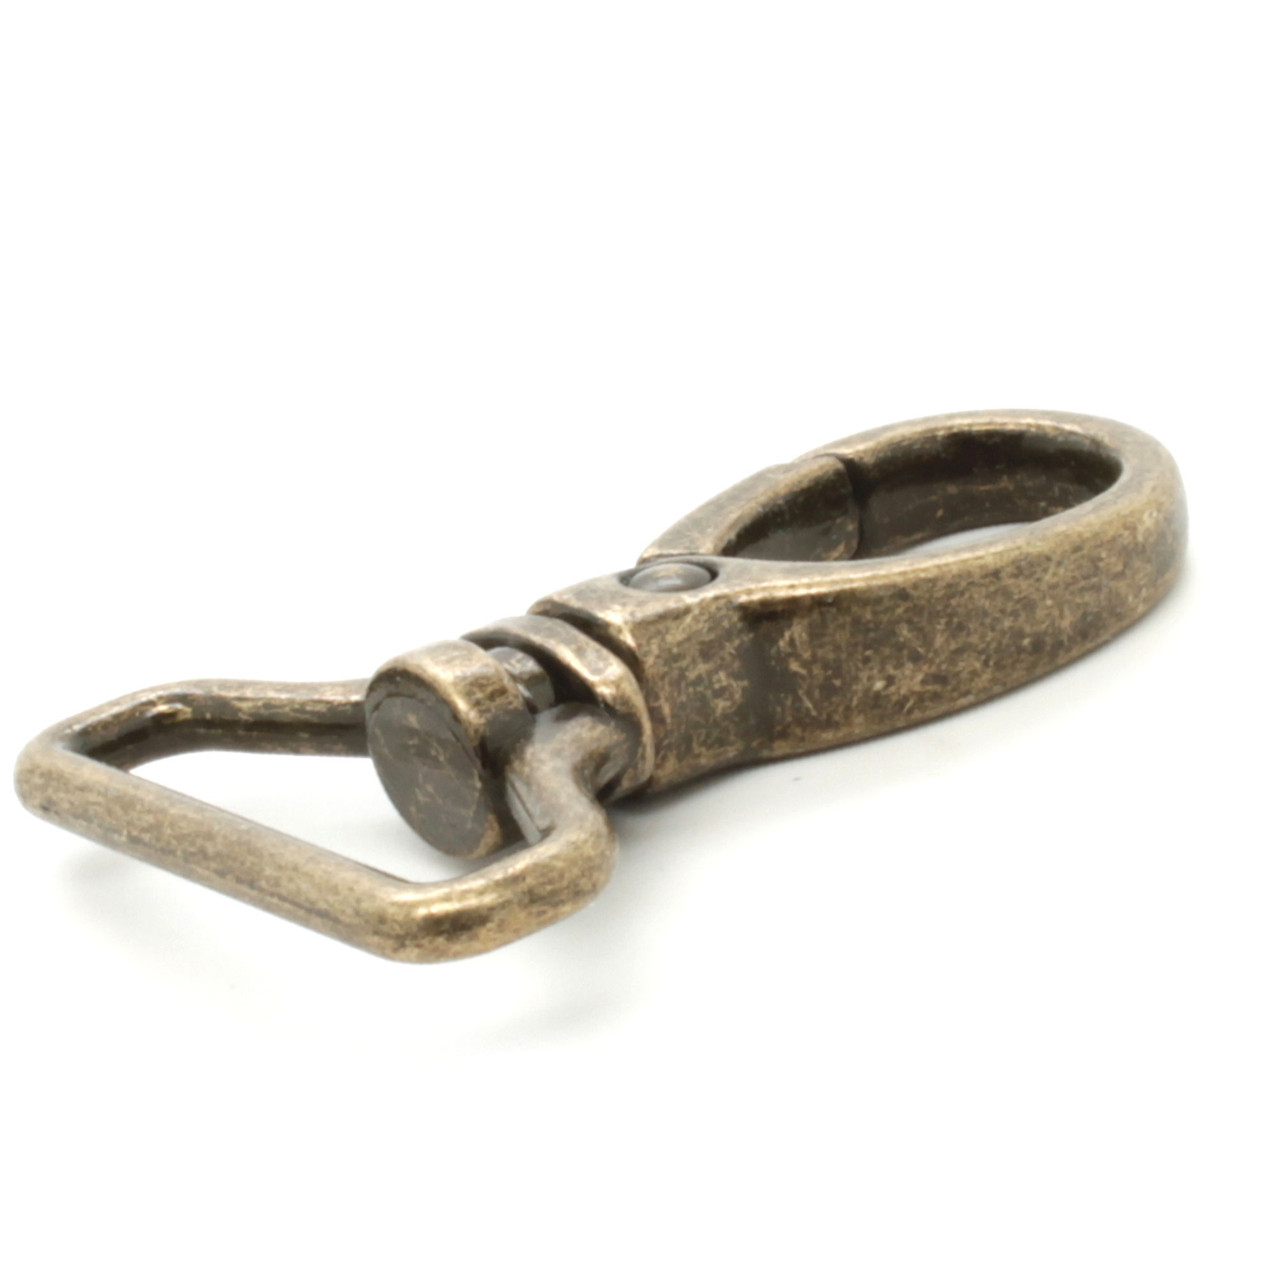 Swivel Snap Leash Clip Lobster Claw Antique Brass Plate 3/4 1170